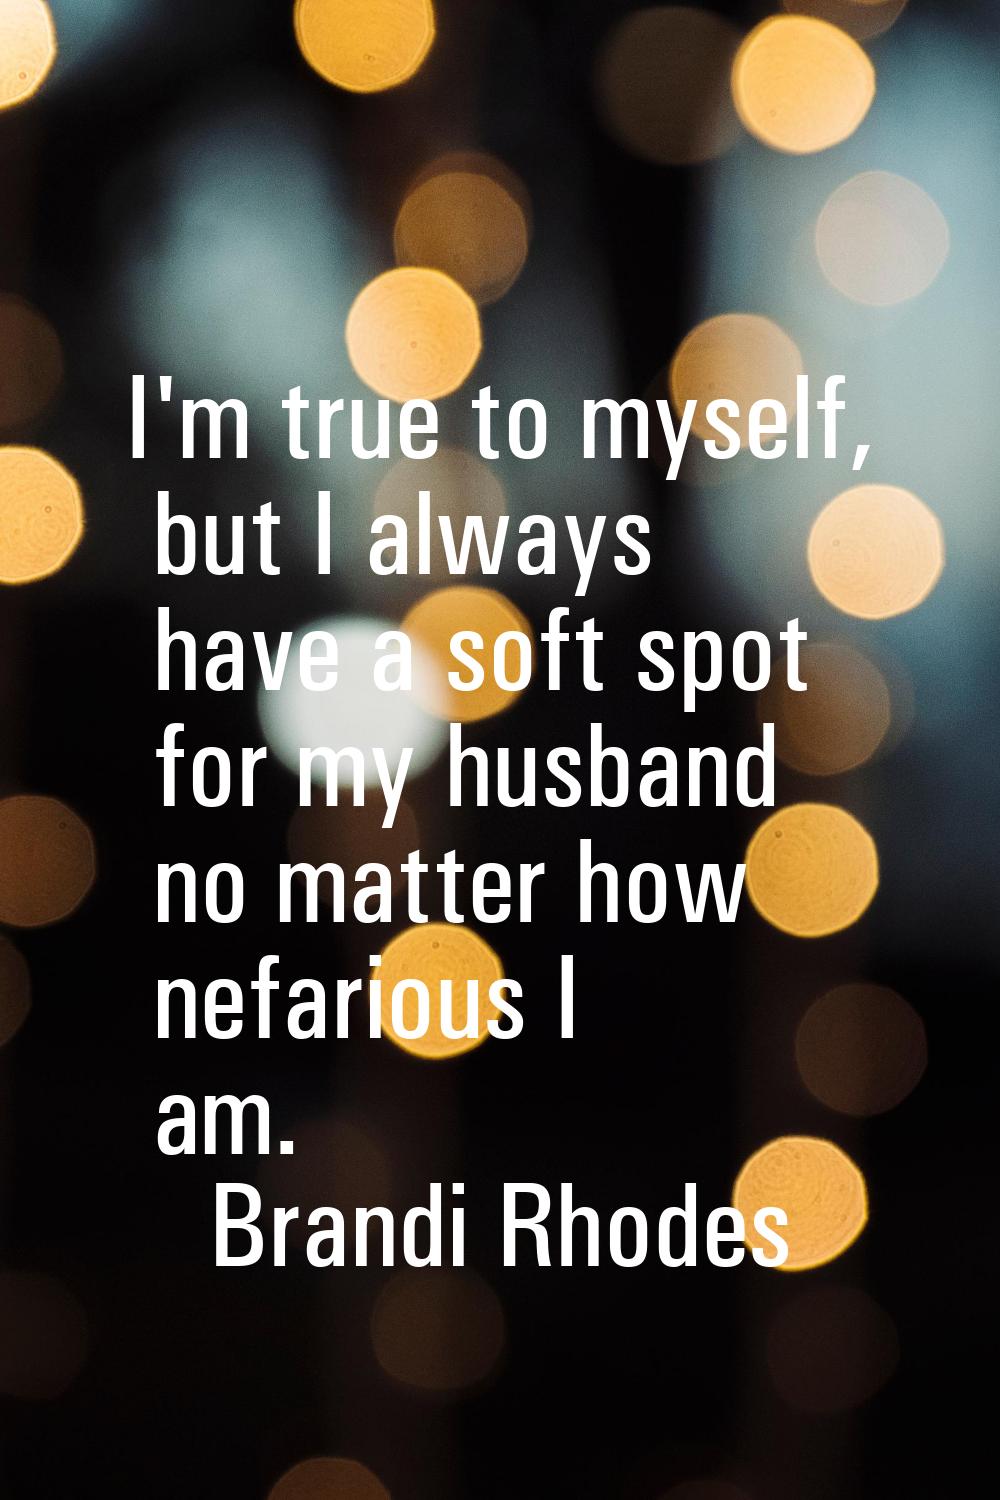 I'm true to myself, but I always have a soft spot for my husband no matter how nefarious I am.